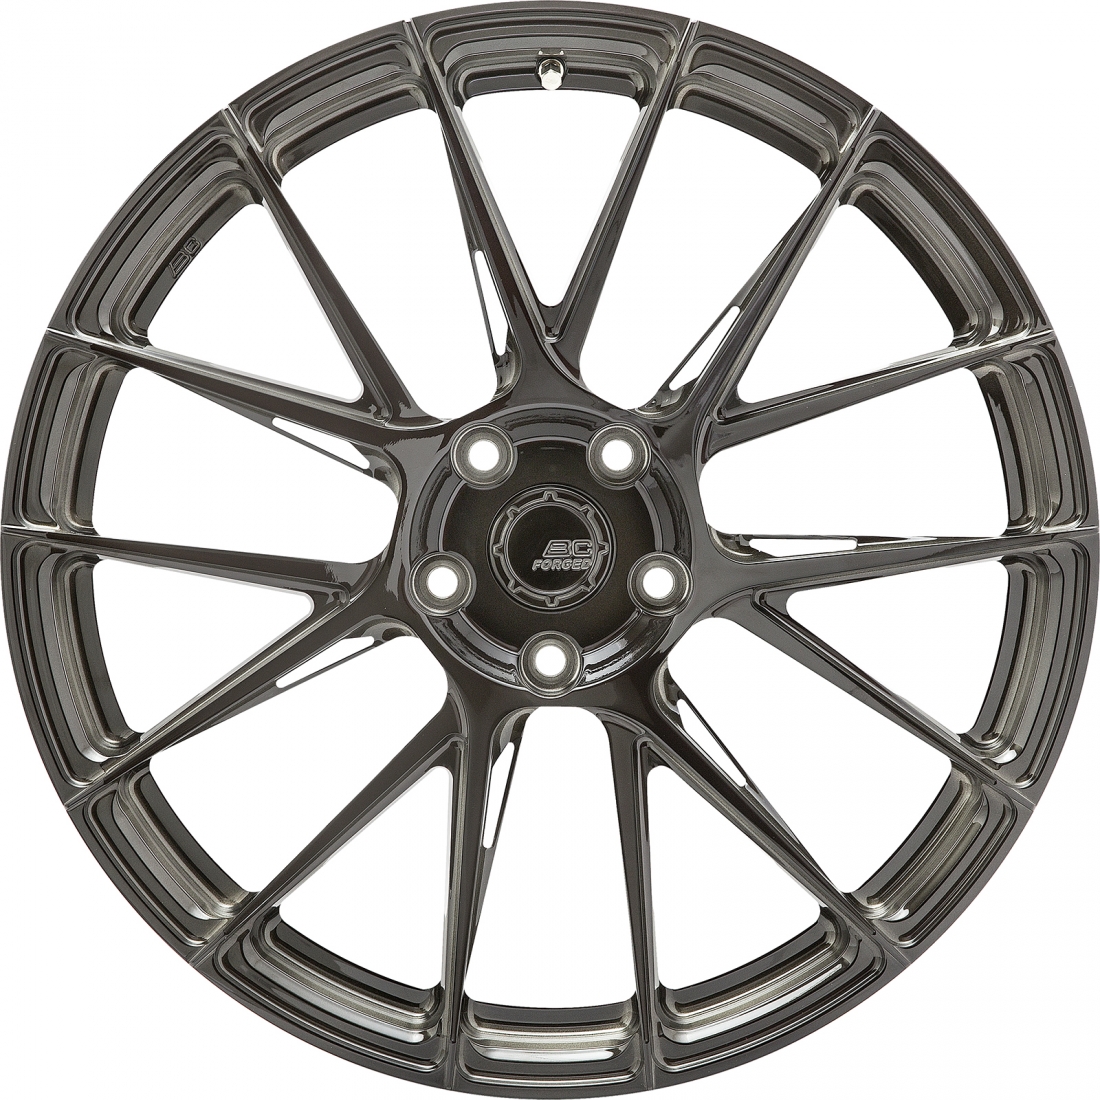 2020-23 BC Forged EH183 Wheels for C8 Corvette, Set of 4